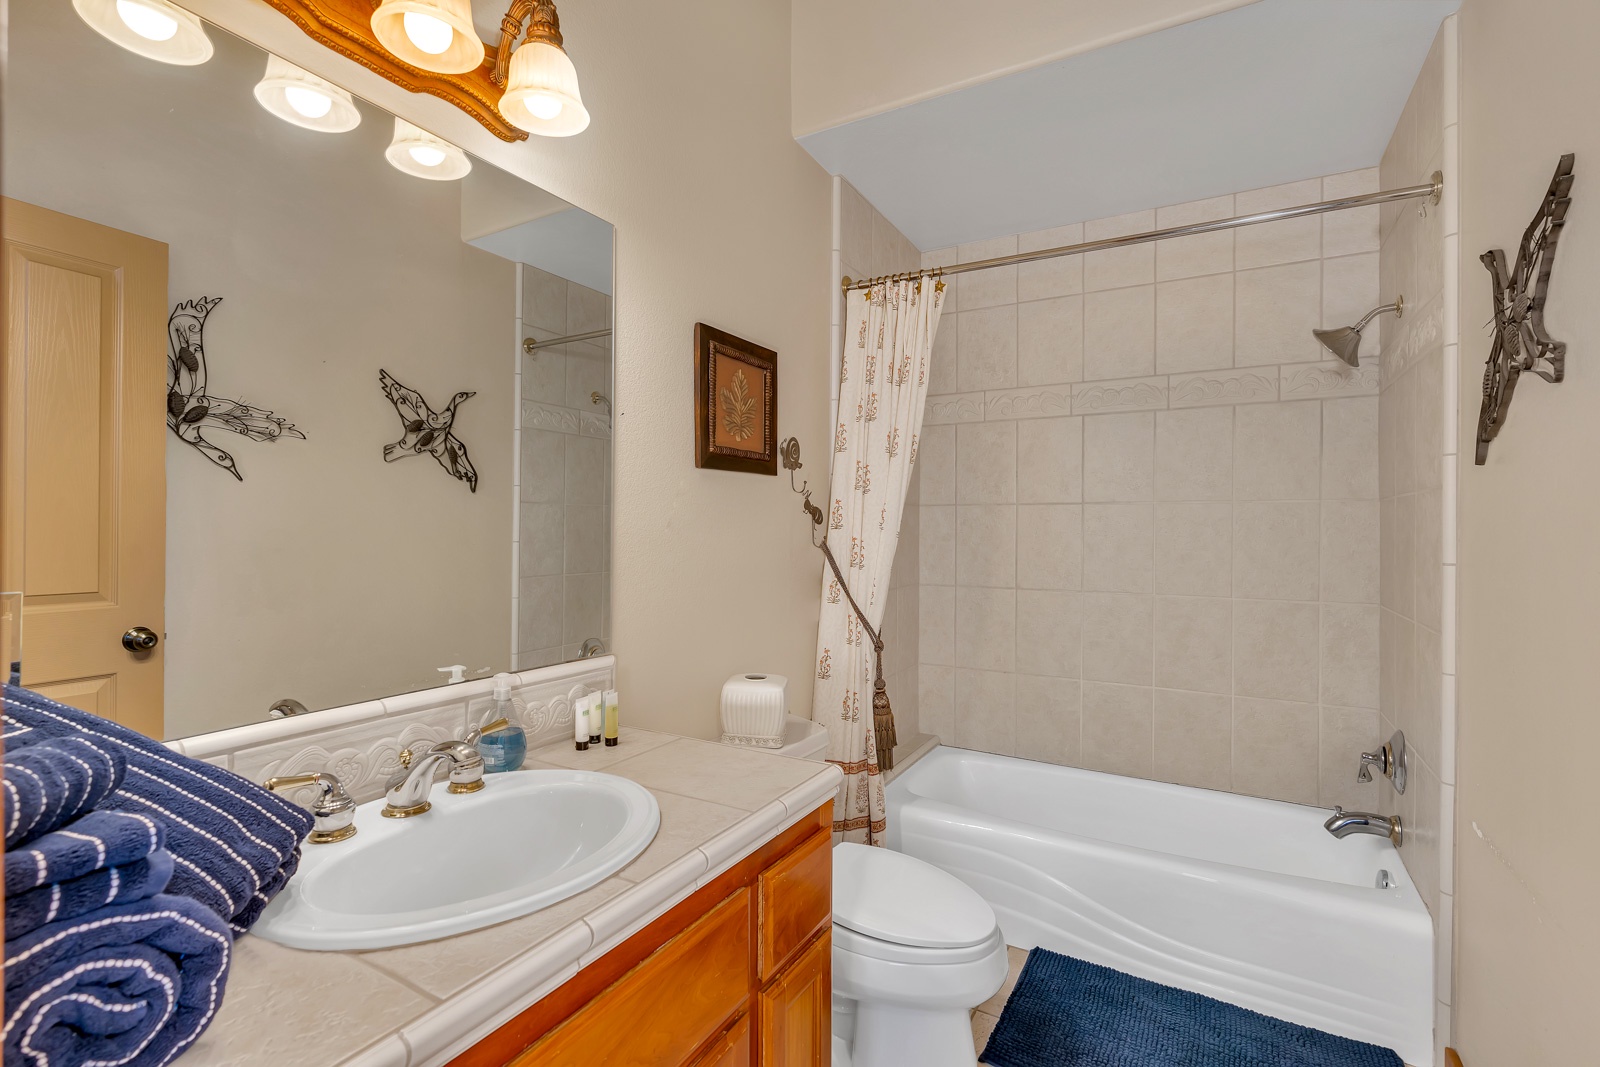 This 1st floor full bathroom includes a single vanity & shower/tub combo